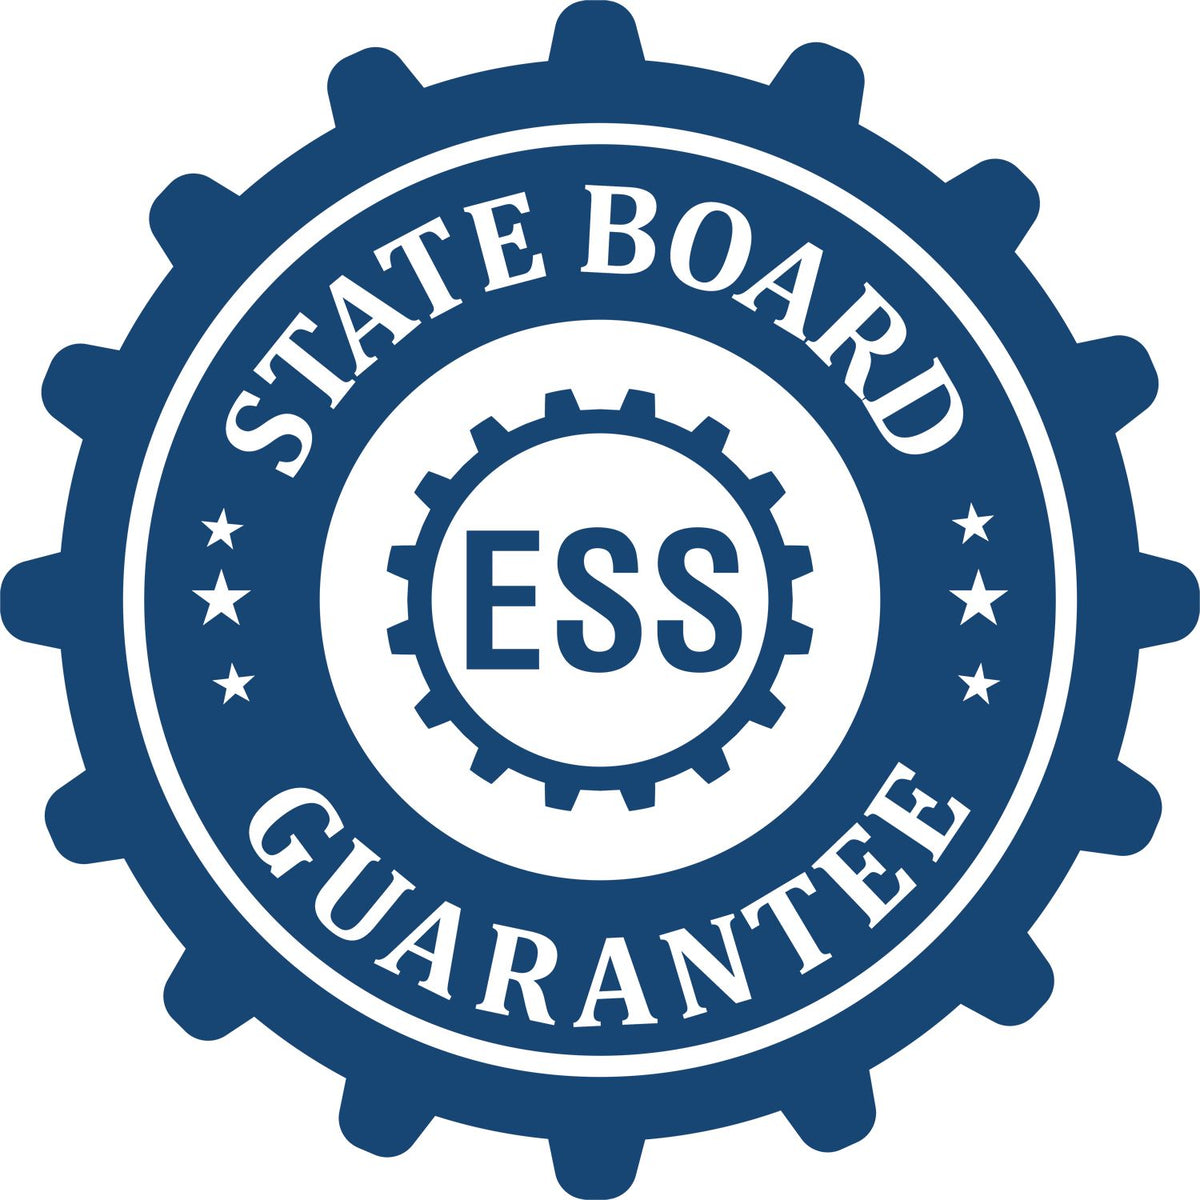 An emblem in a gear shape illustrating a state board guarantee for the Self-Inking Rectangular Maryland Notary Stamp product.